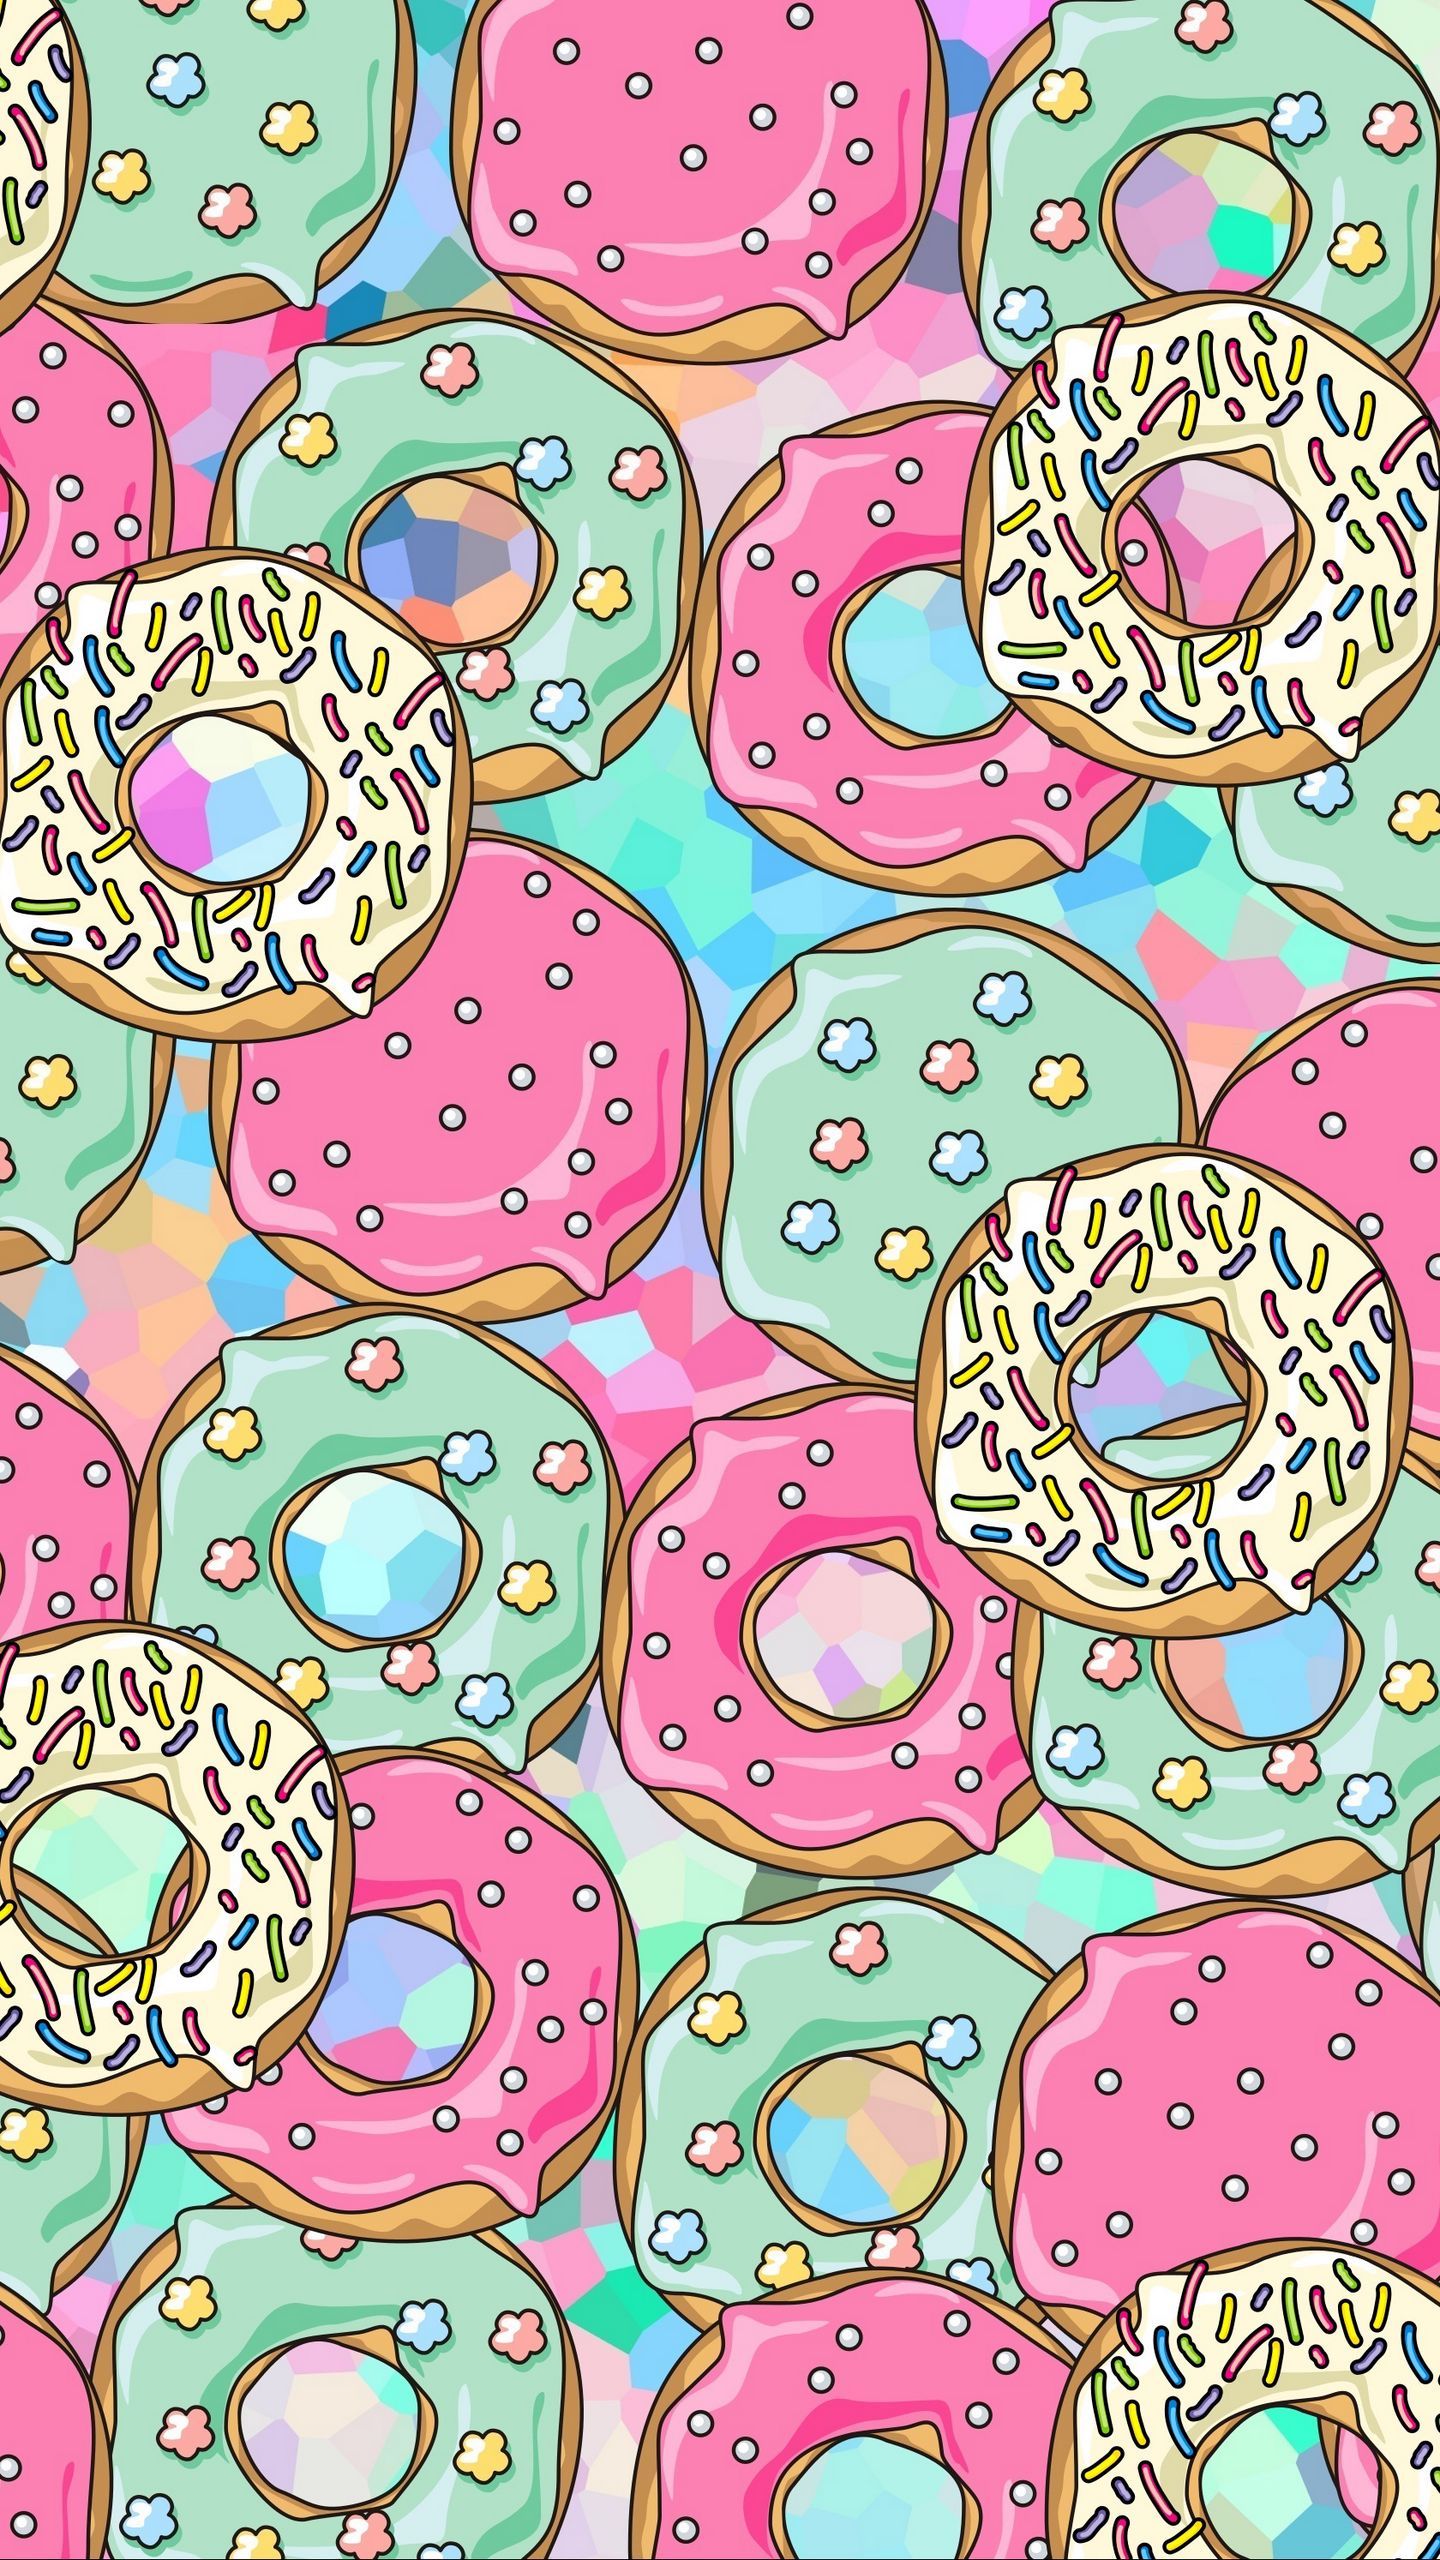 Download wallpaper 1440x2560 donuts, patterns, sweet, colorful, texture qhd samsung galaxy s s edge, note, lg g4 HD background